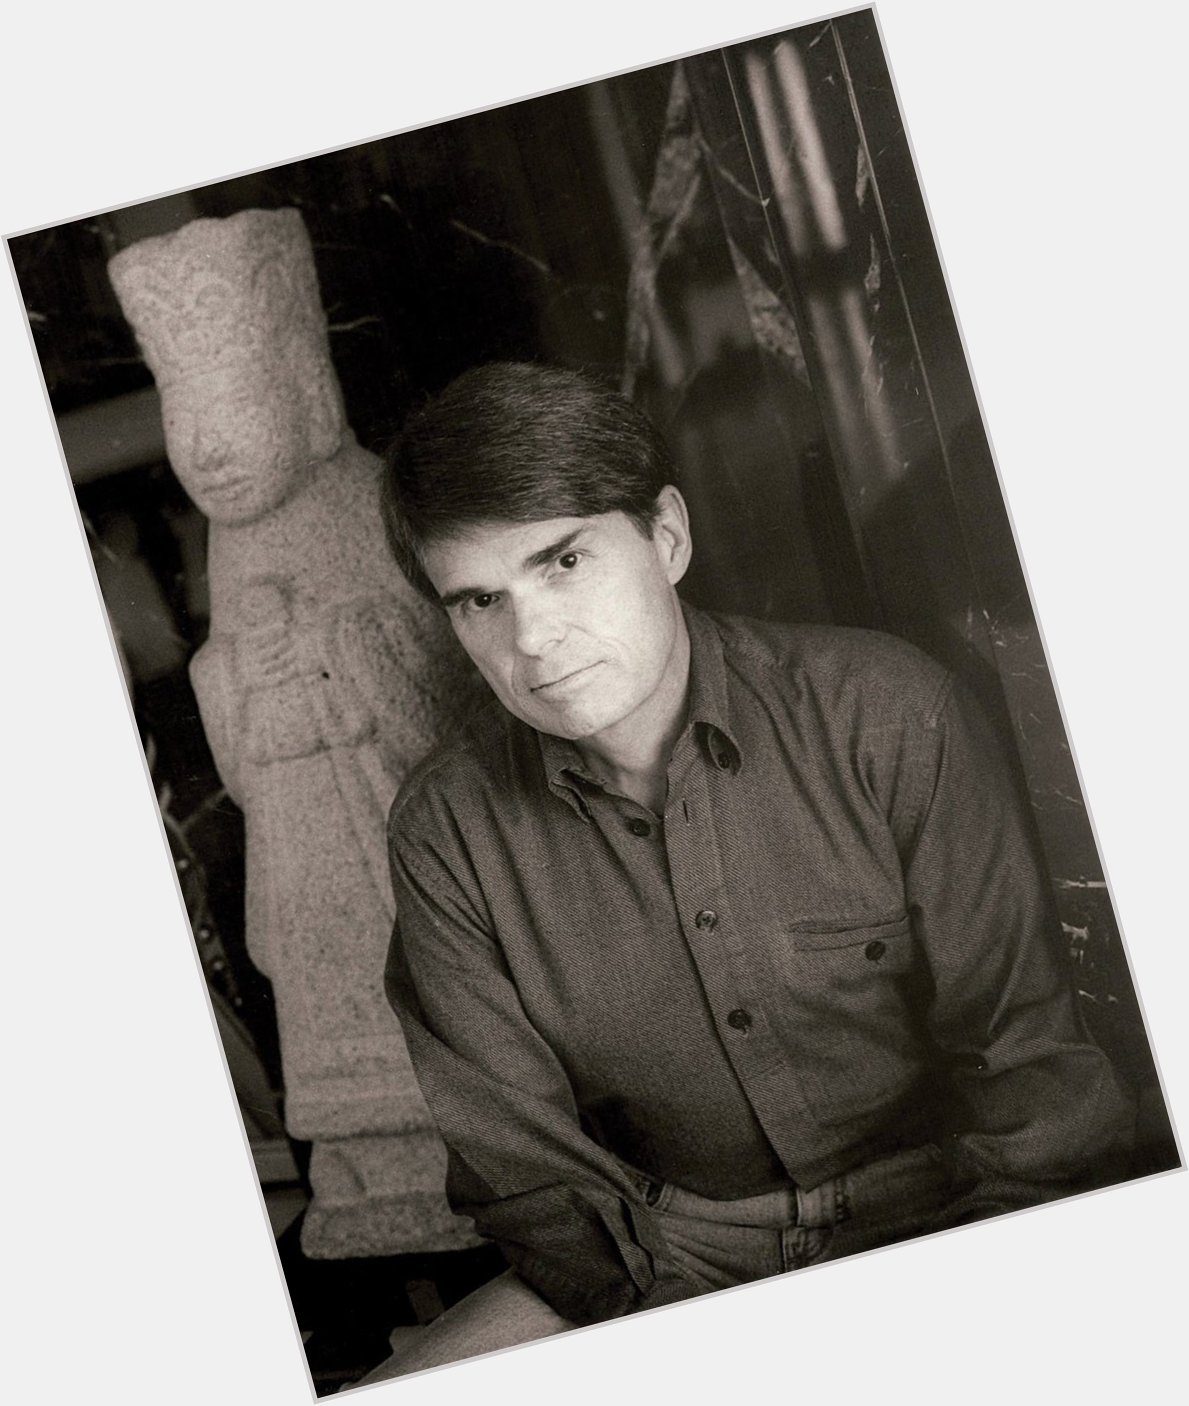 Happy birthday to horror author Dean Koontz! Which of his scary stories is your favorite?  